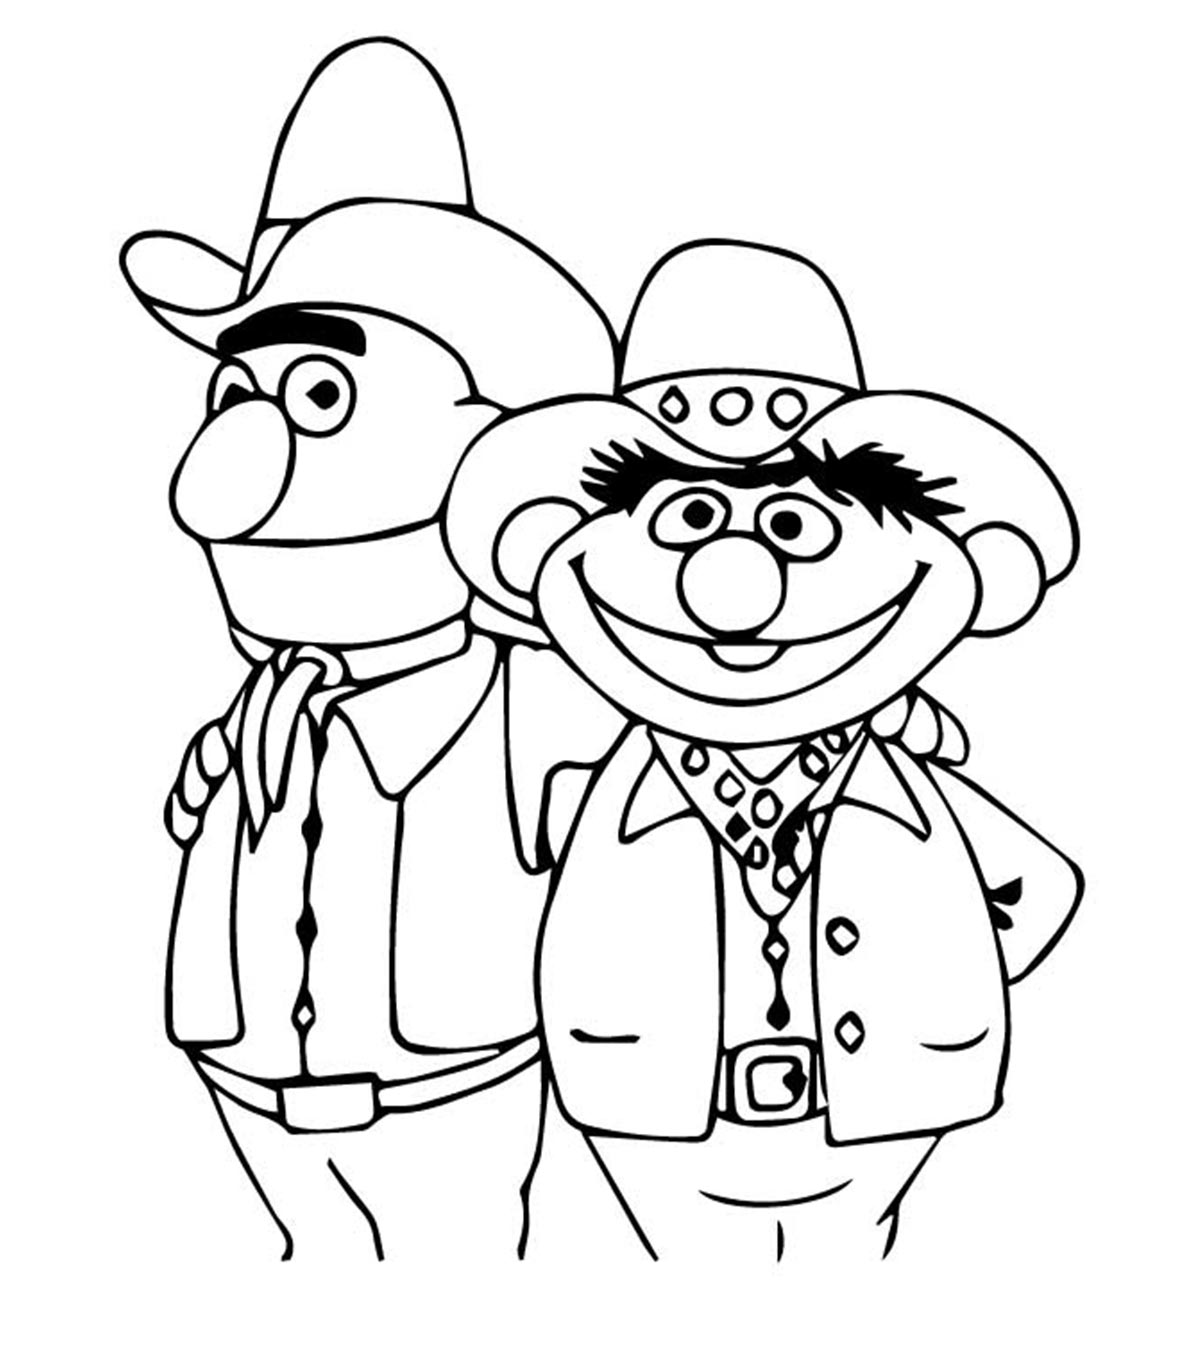 Top 15 Sesame Street Coloring Pages For Your Toddler_image